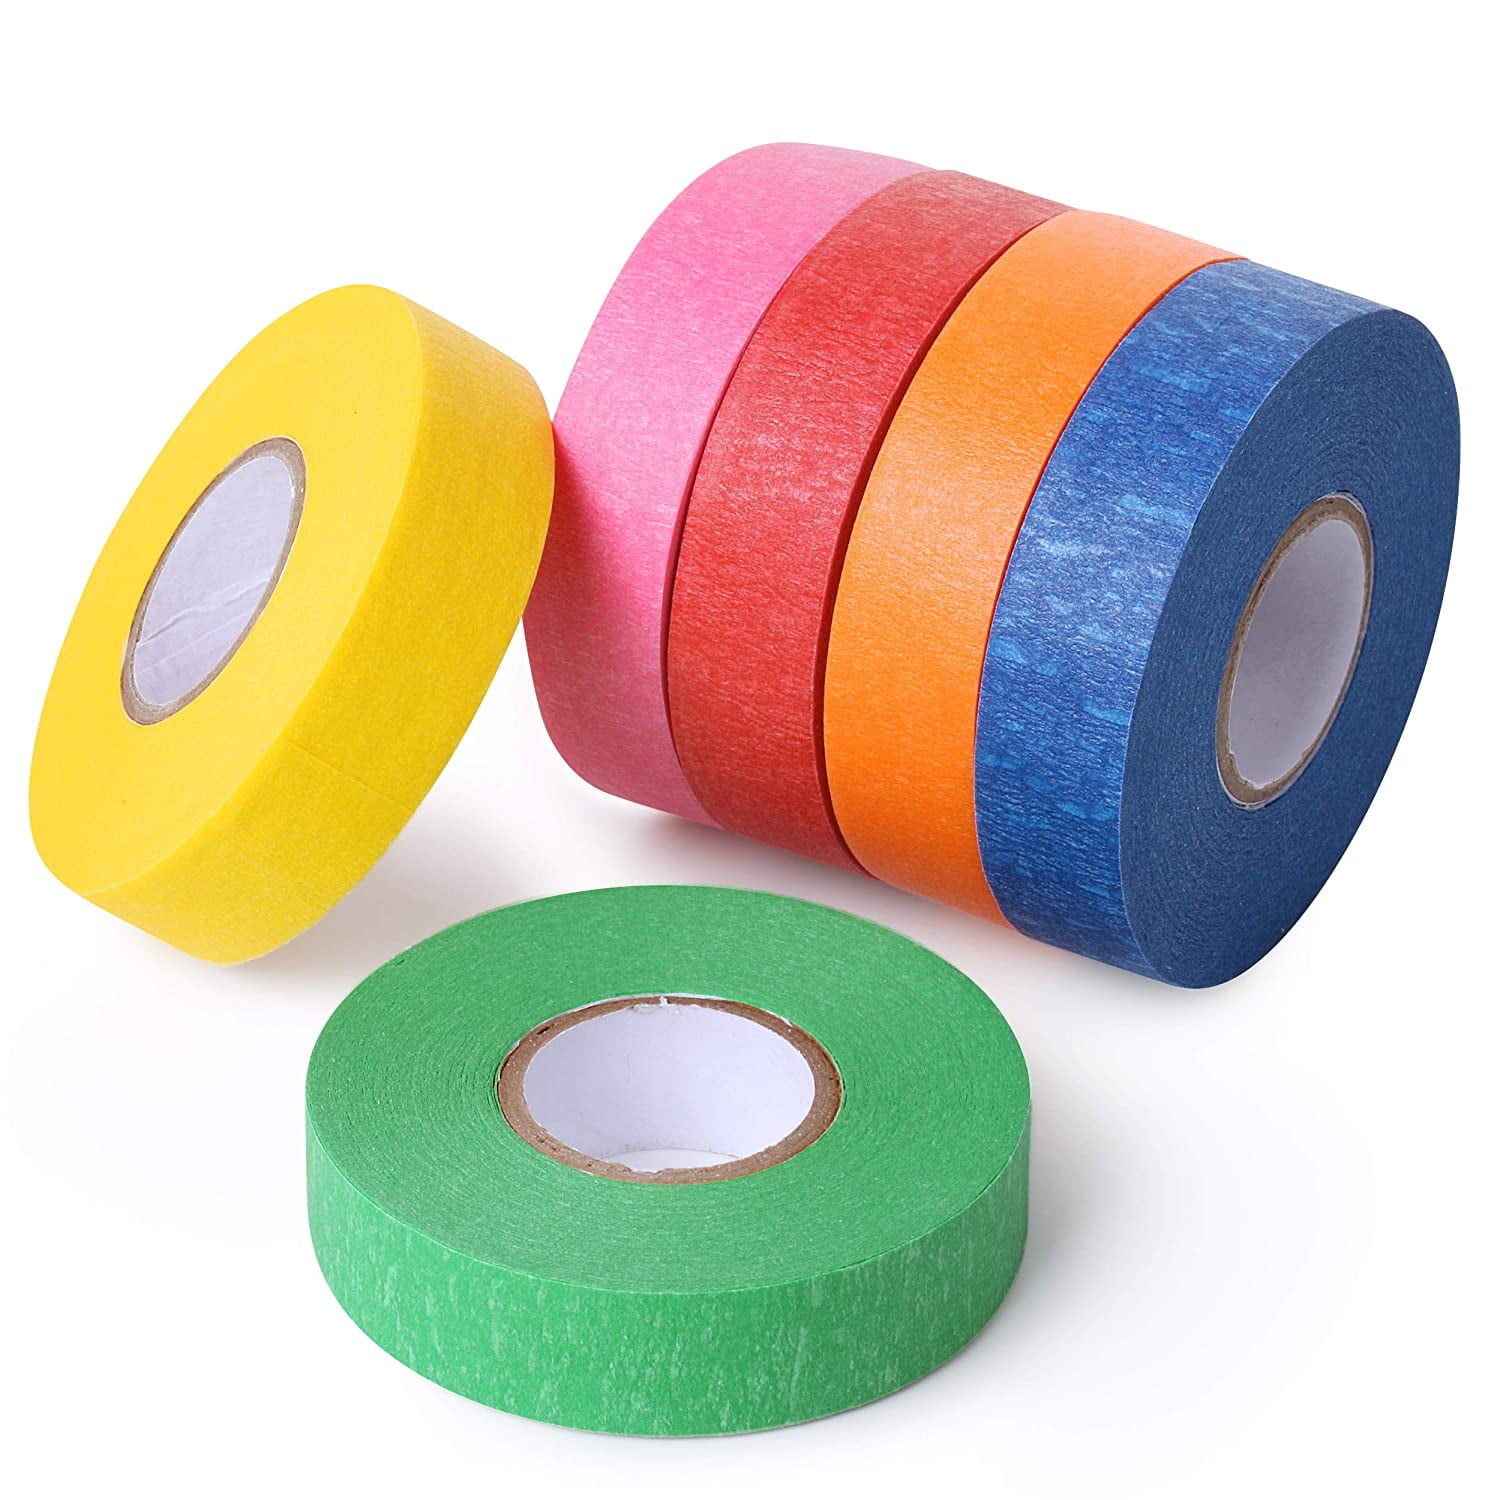 Heldig Colored Masking Tape, Colored Painters Tape for Arts and